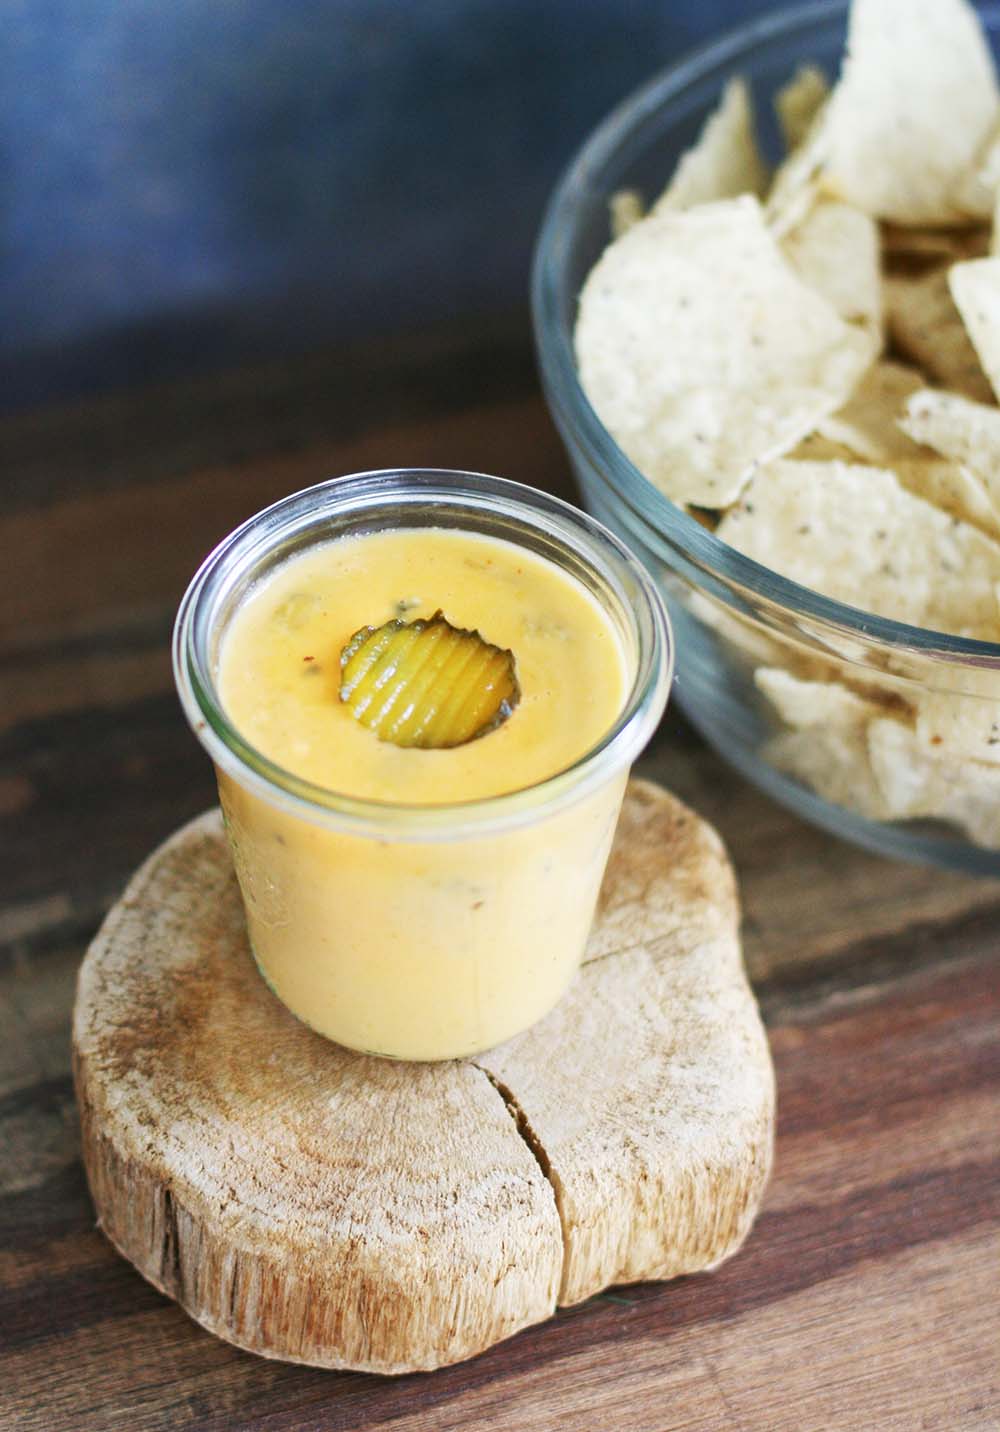 Dill pickle queso: If you like queso with jalapenos, you have to try this irresistible pickle version.